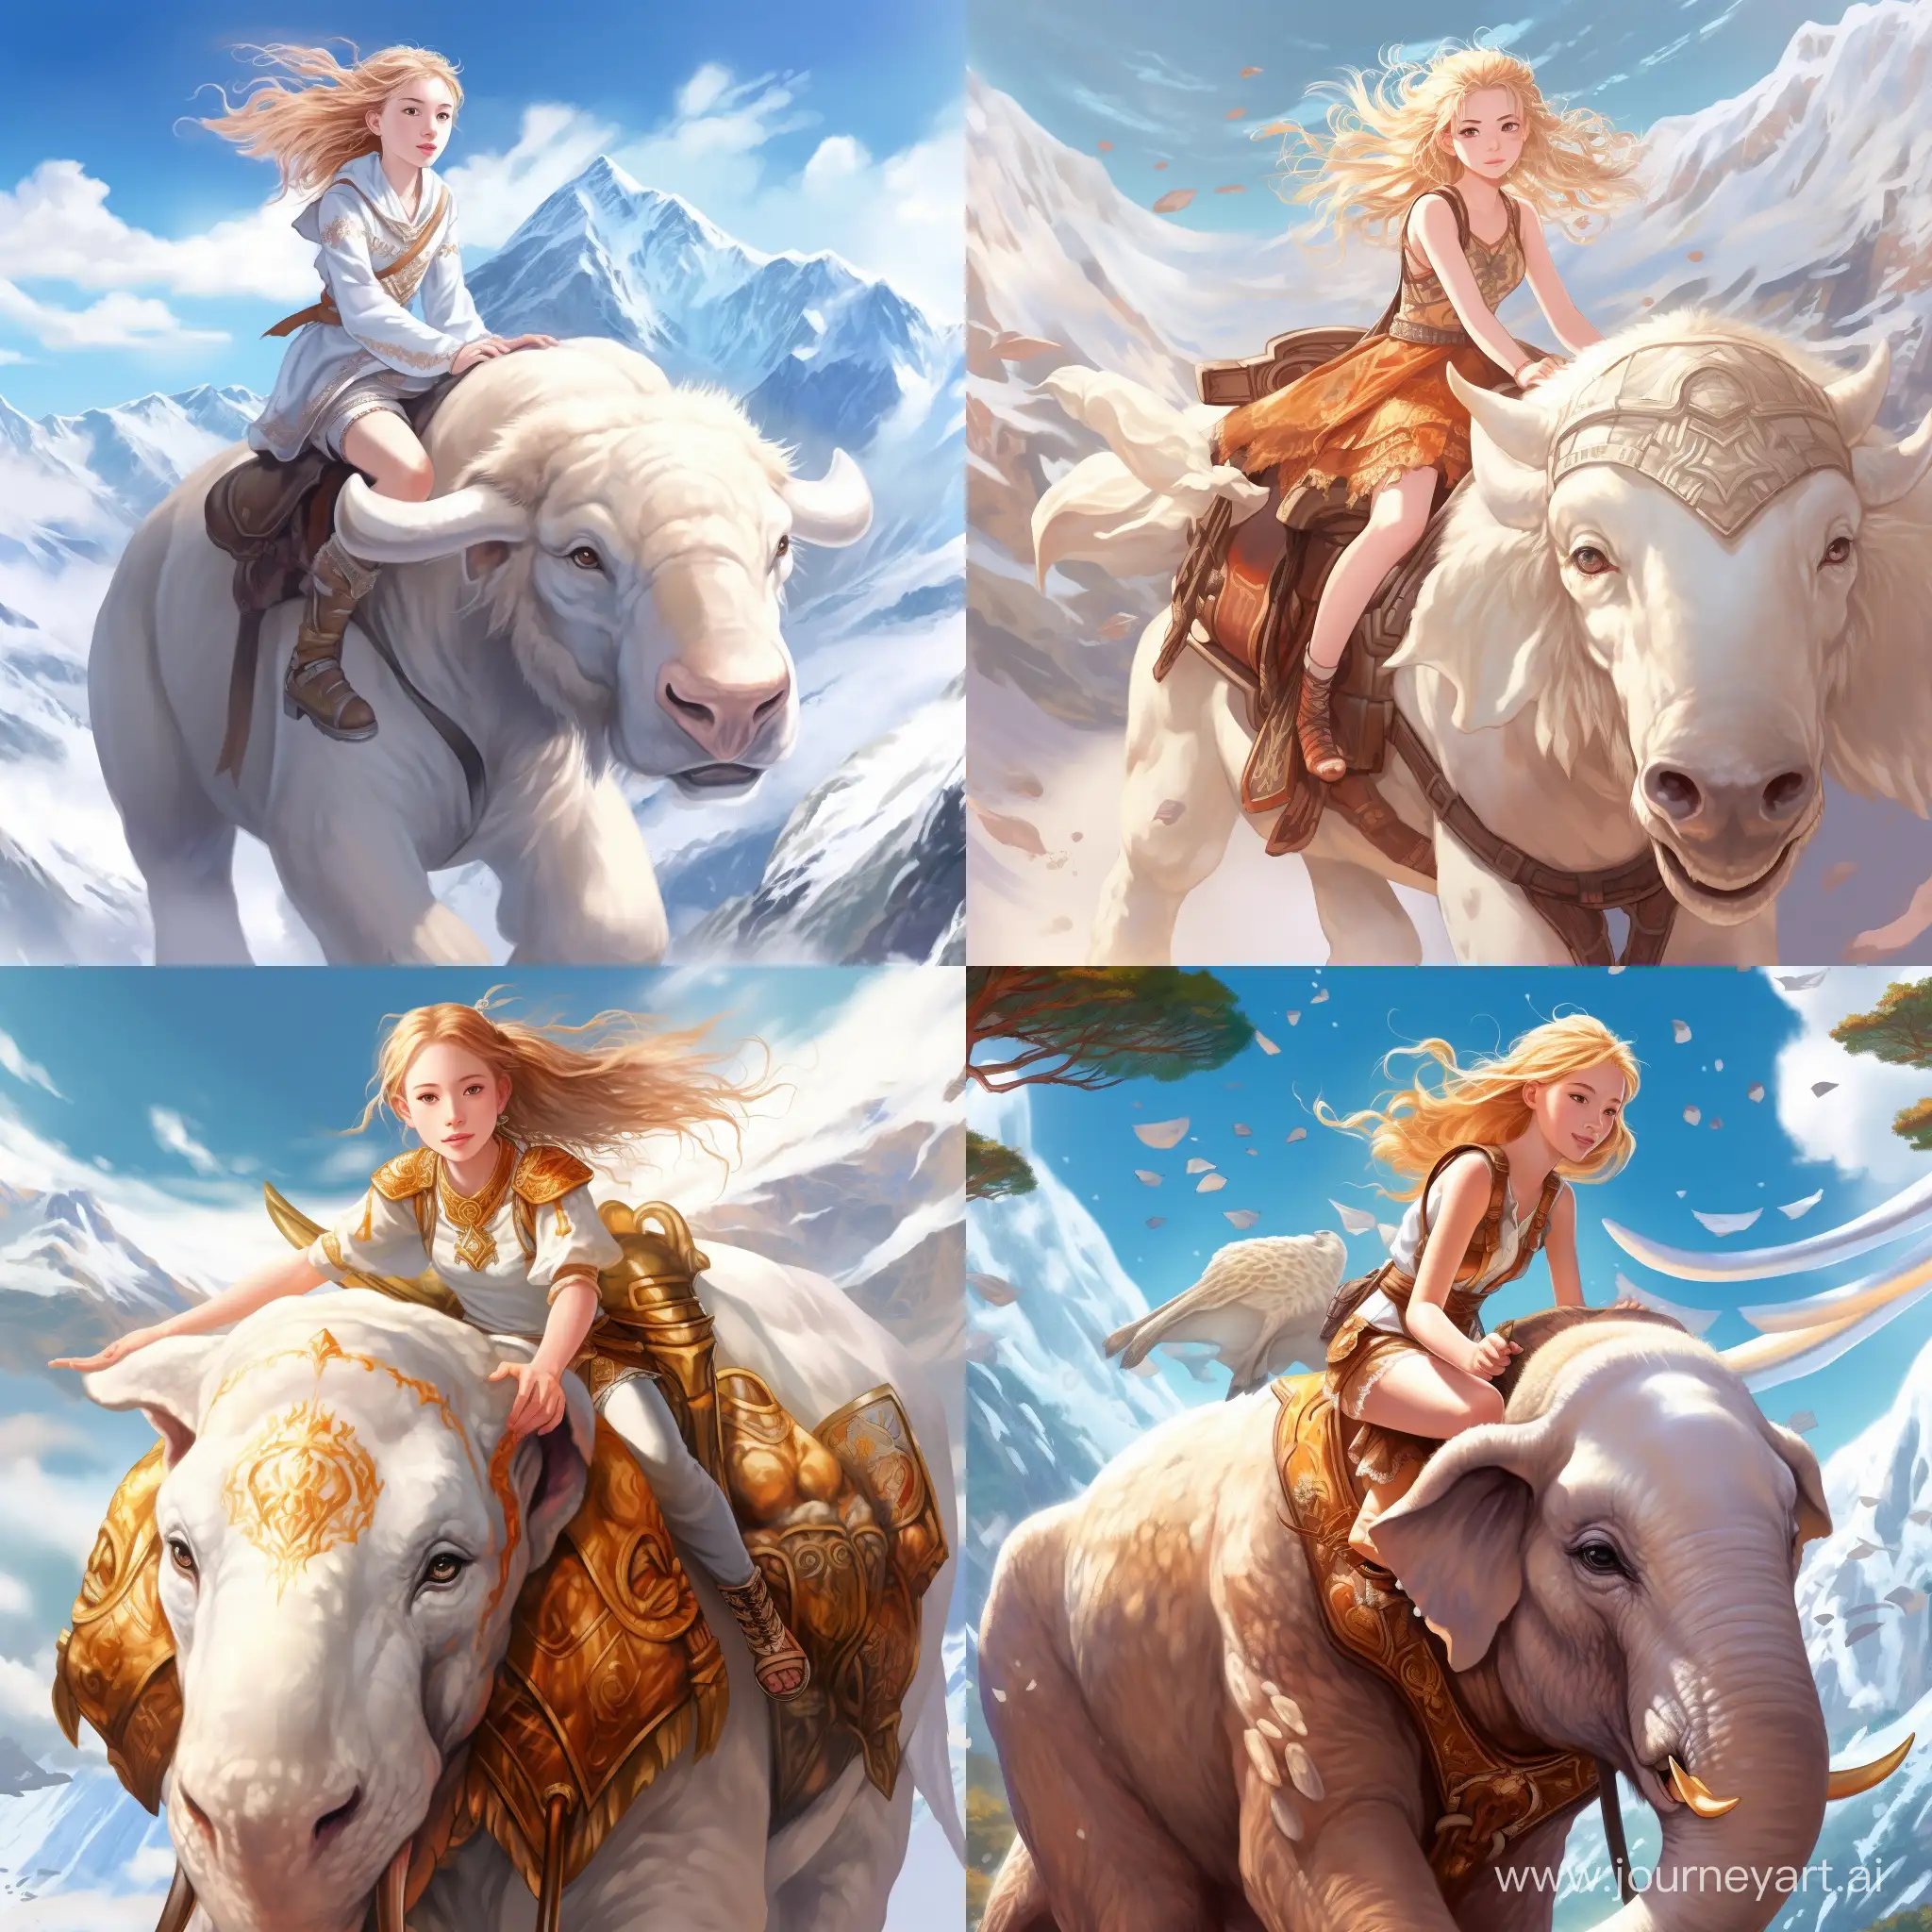 Beautiful girl, golden hair, gray-blue eyes, snow-white skin, teenager, 14 years old, in the style of avatar legend of aang, full-length, riding a flying bison, in the sky, Appa, high quality, high detail, cartoon art